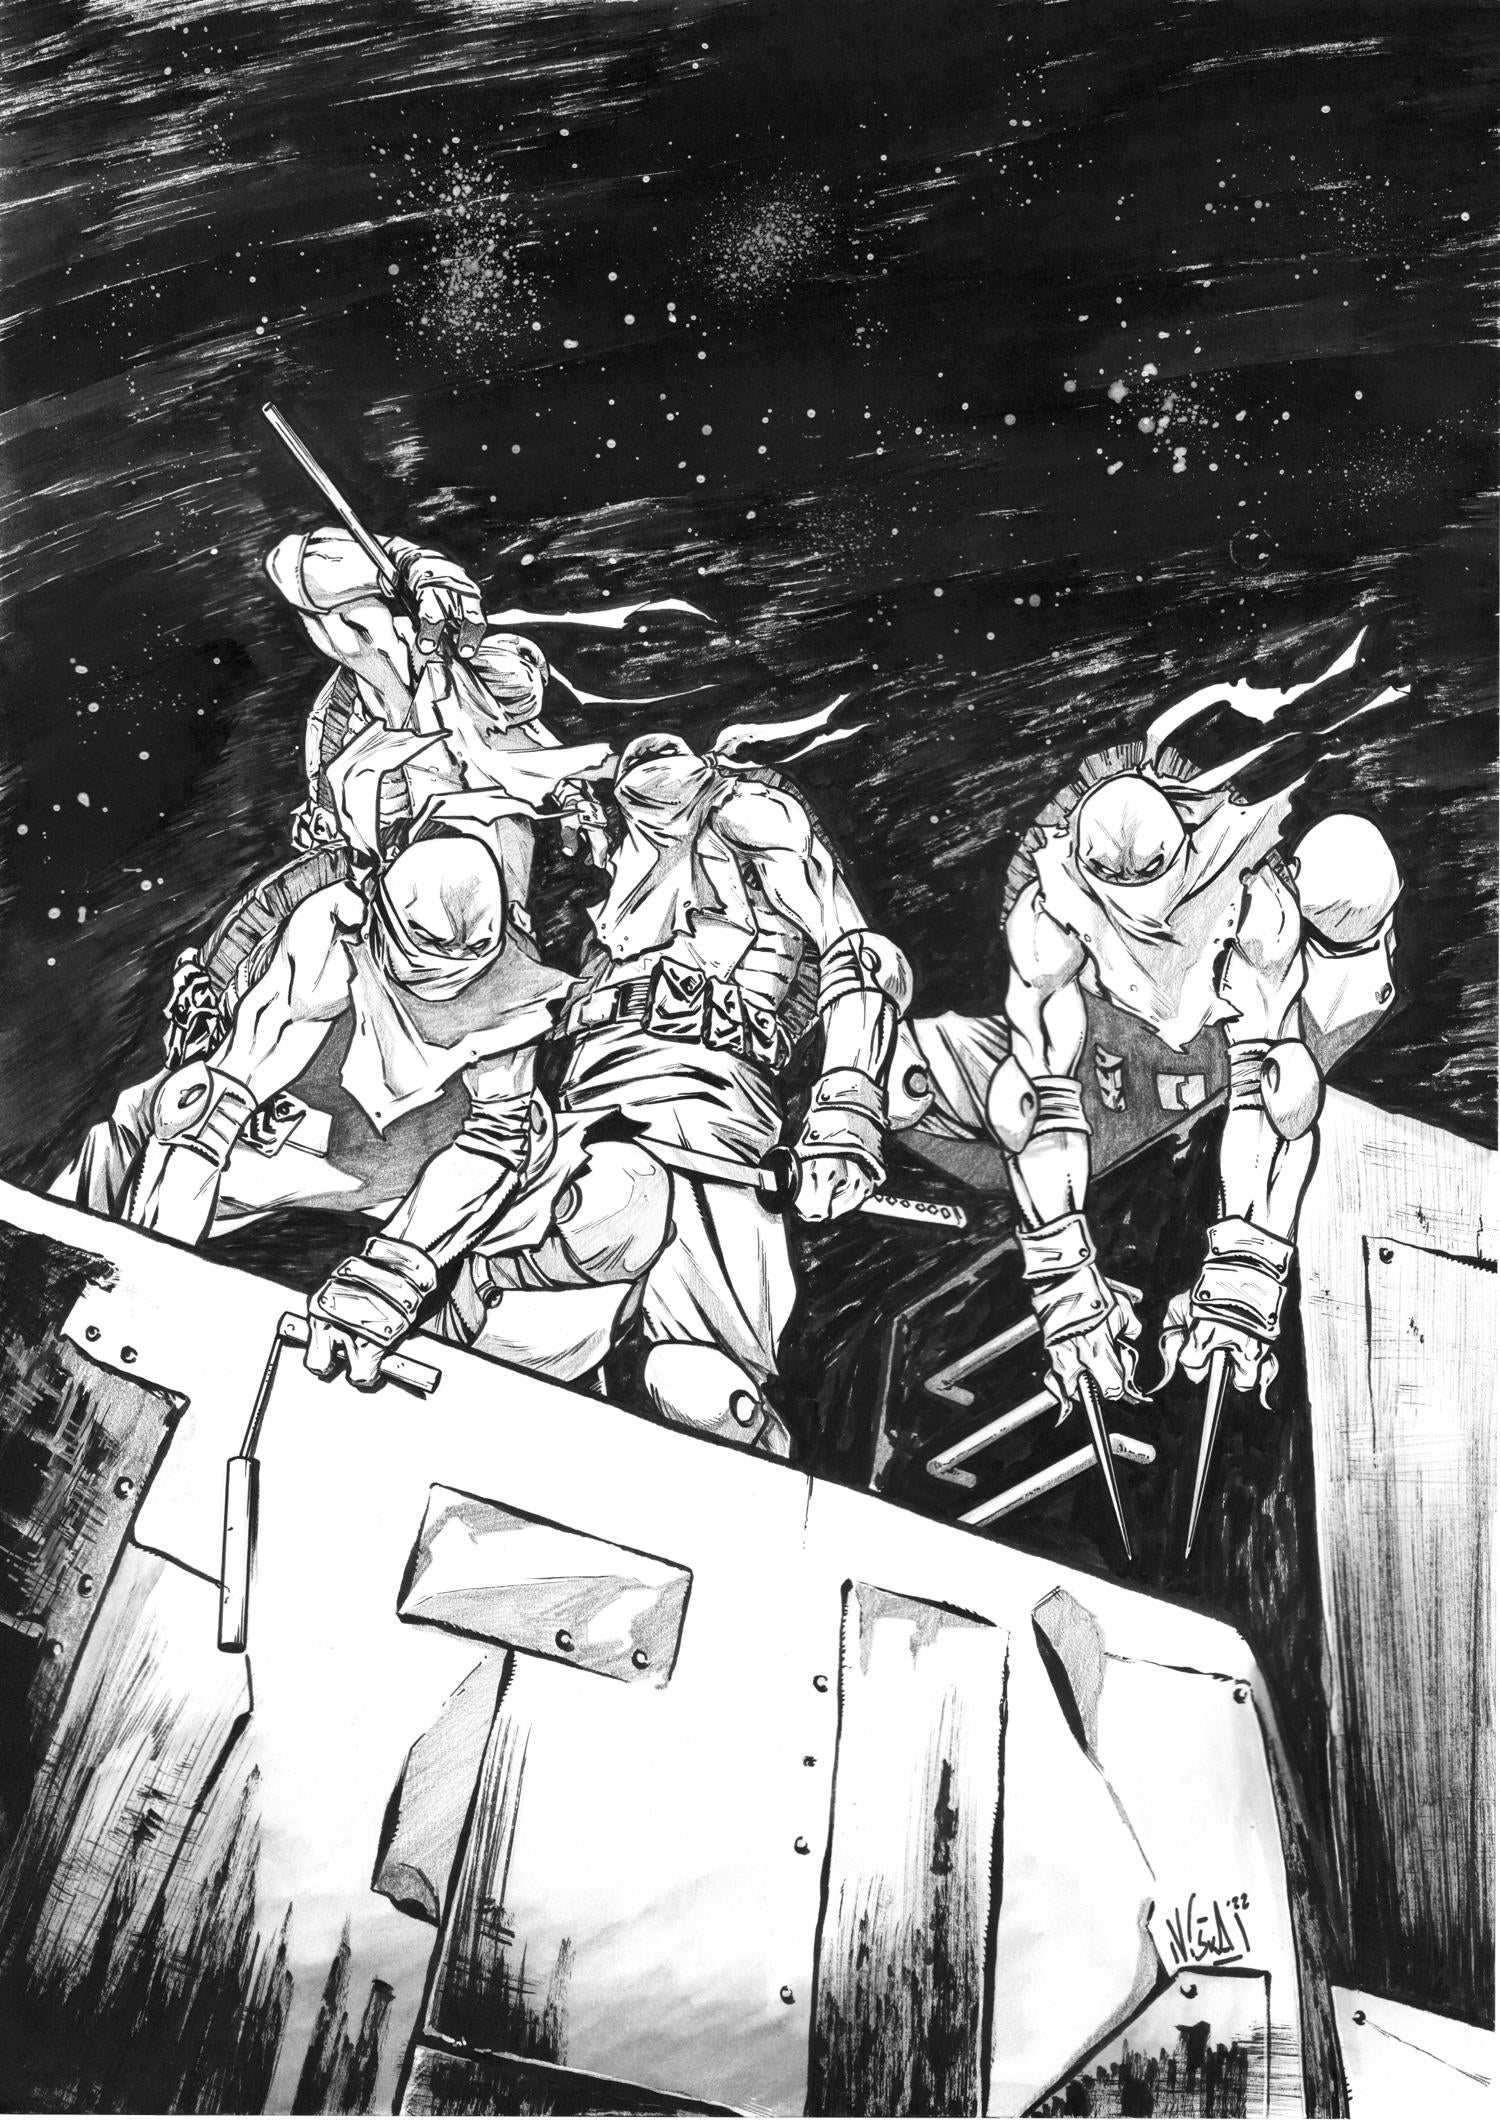 tmnt-armageddon-game-2-cover-a-by-vincenzo-federici.jpg